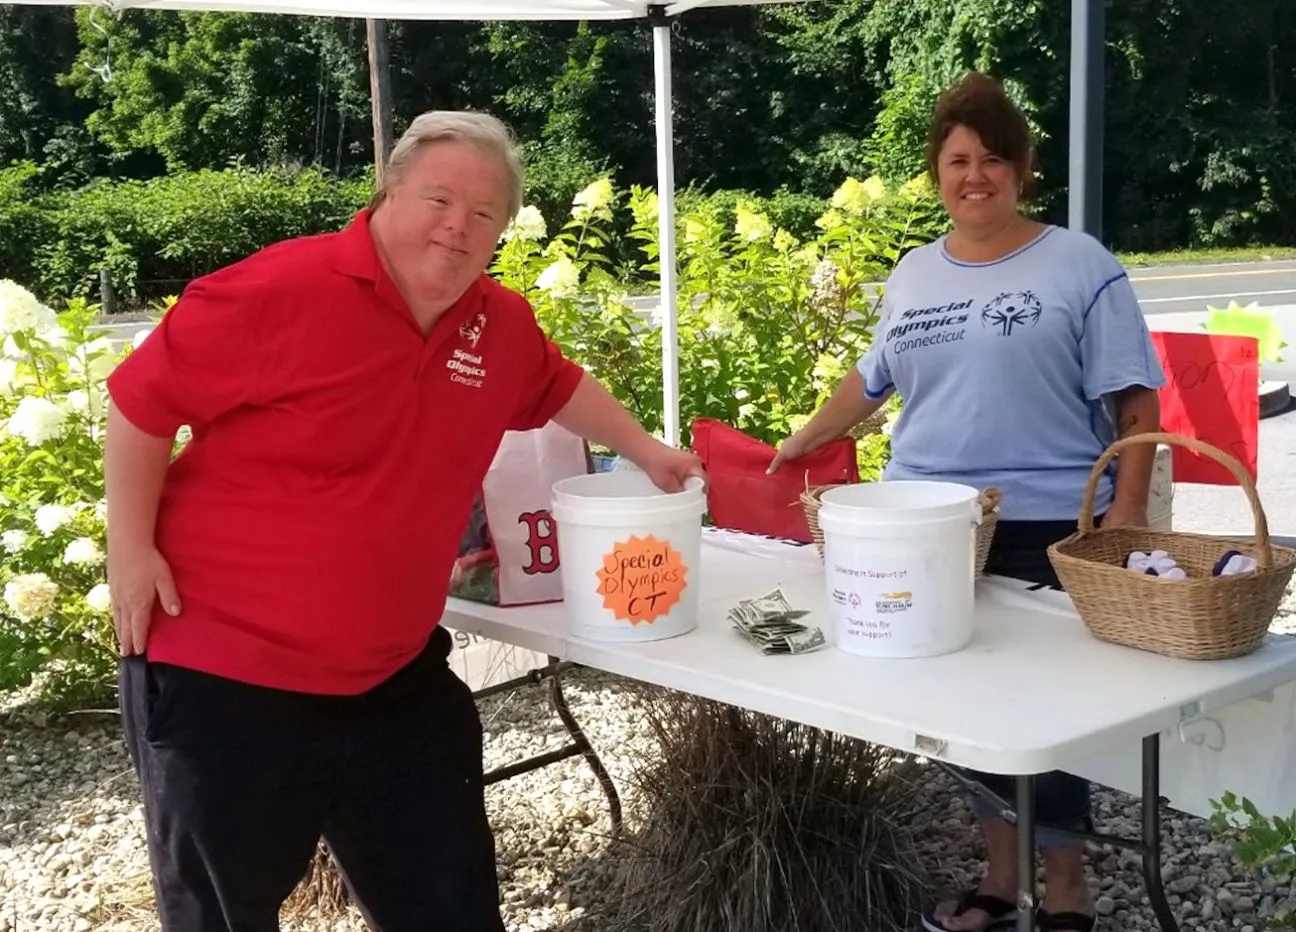 Two adults standing under a tent at a table with money and buckets on it collecting donations.